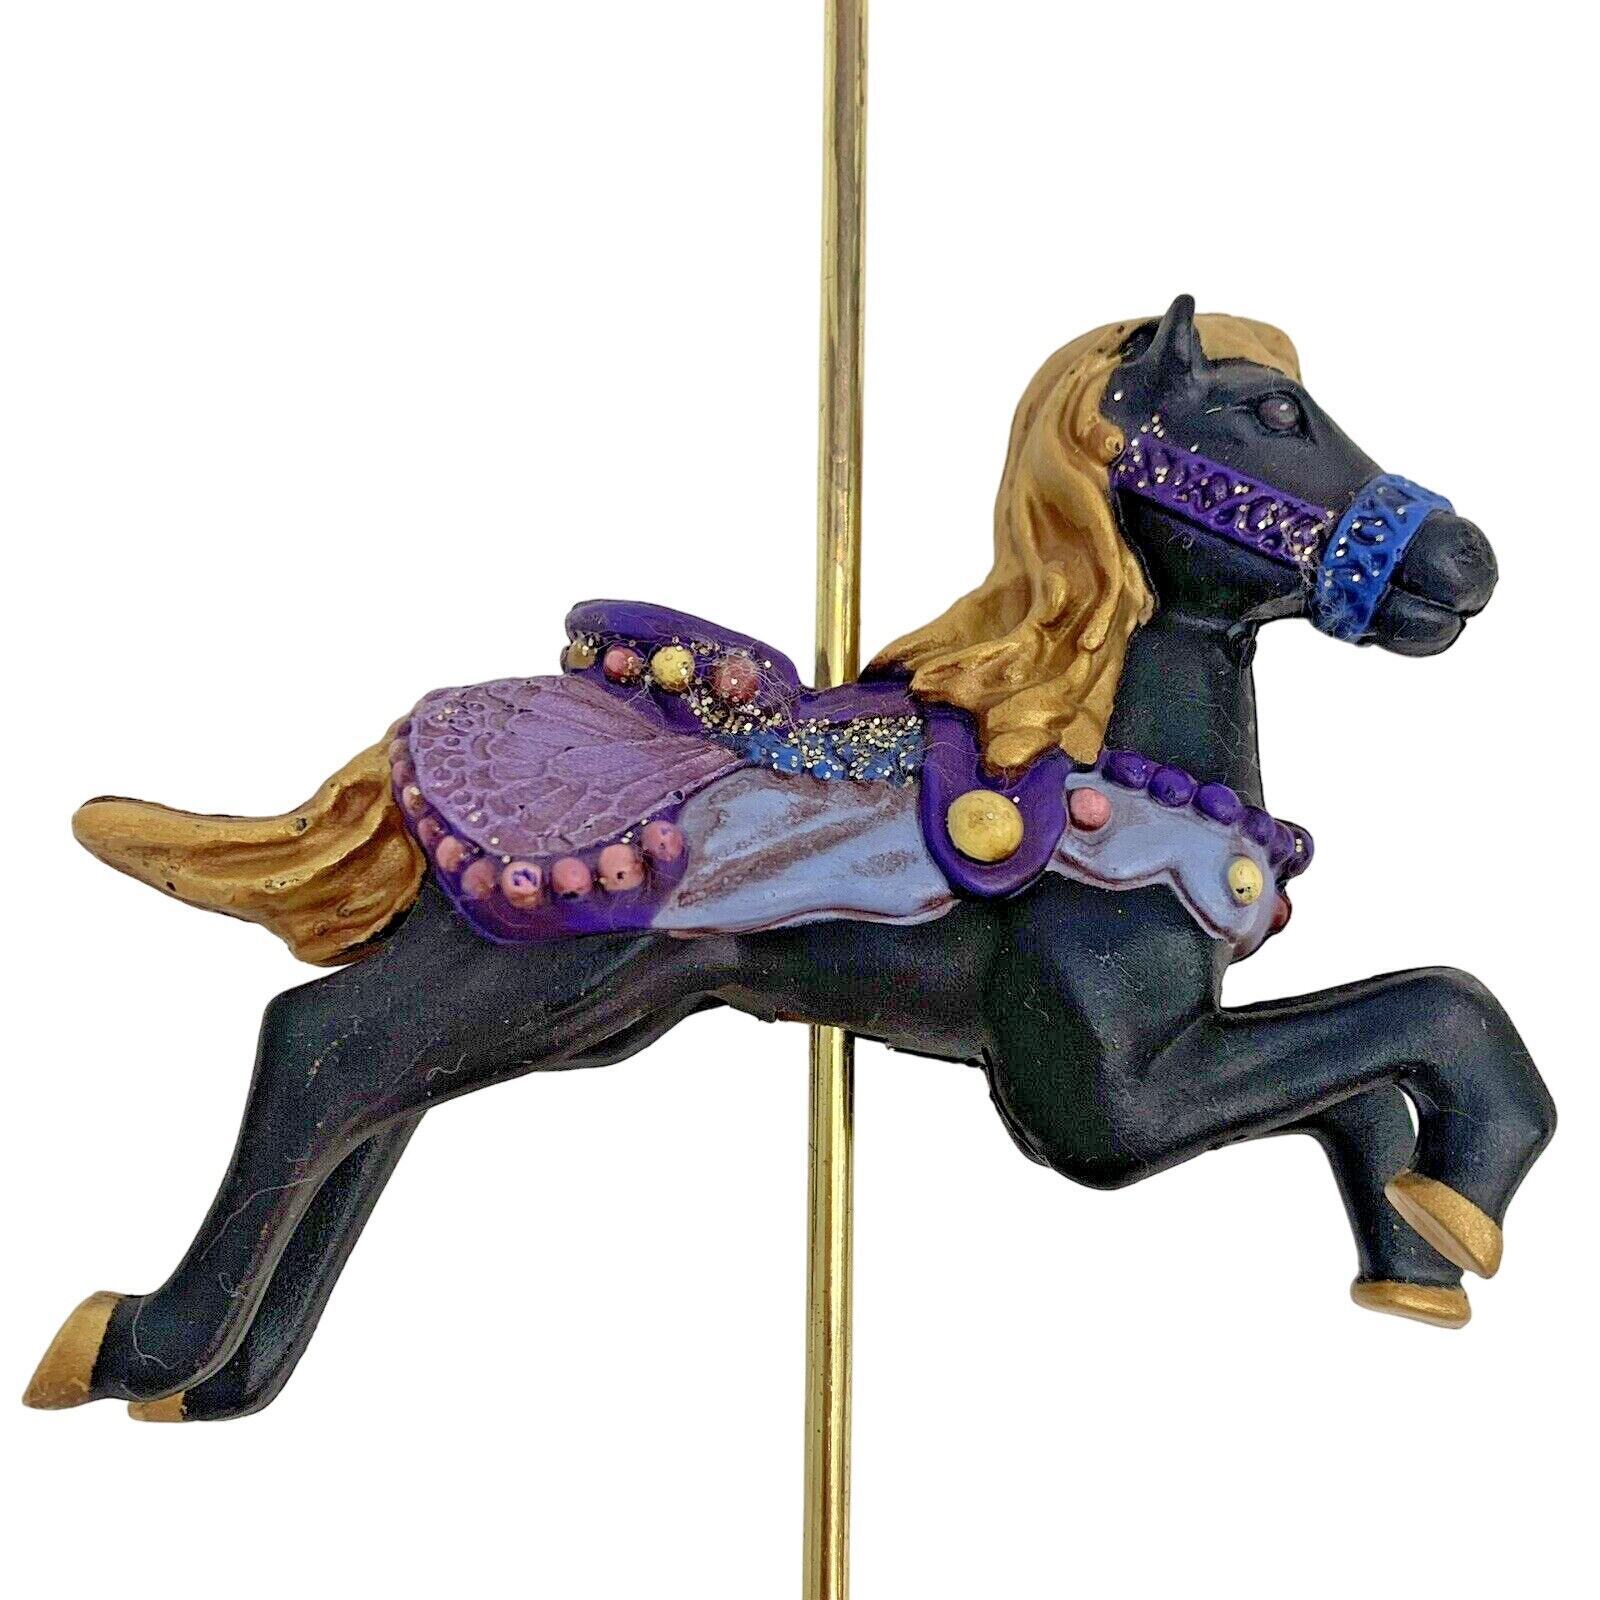 Mr Christmas Carousel Replacement Part Black Horse on 12 in Metal Pole Vintage